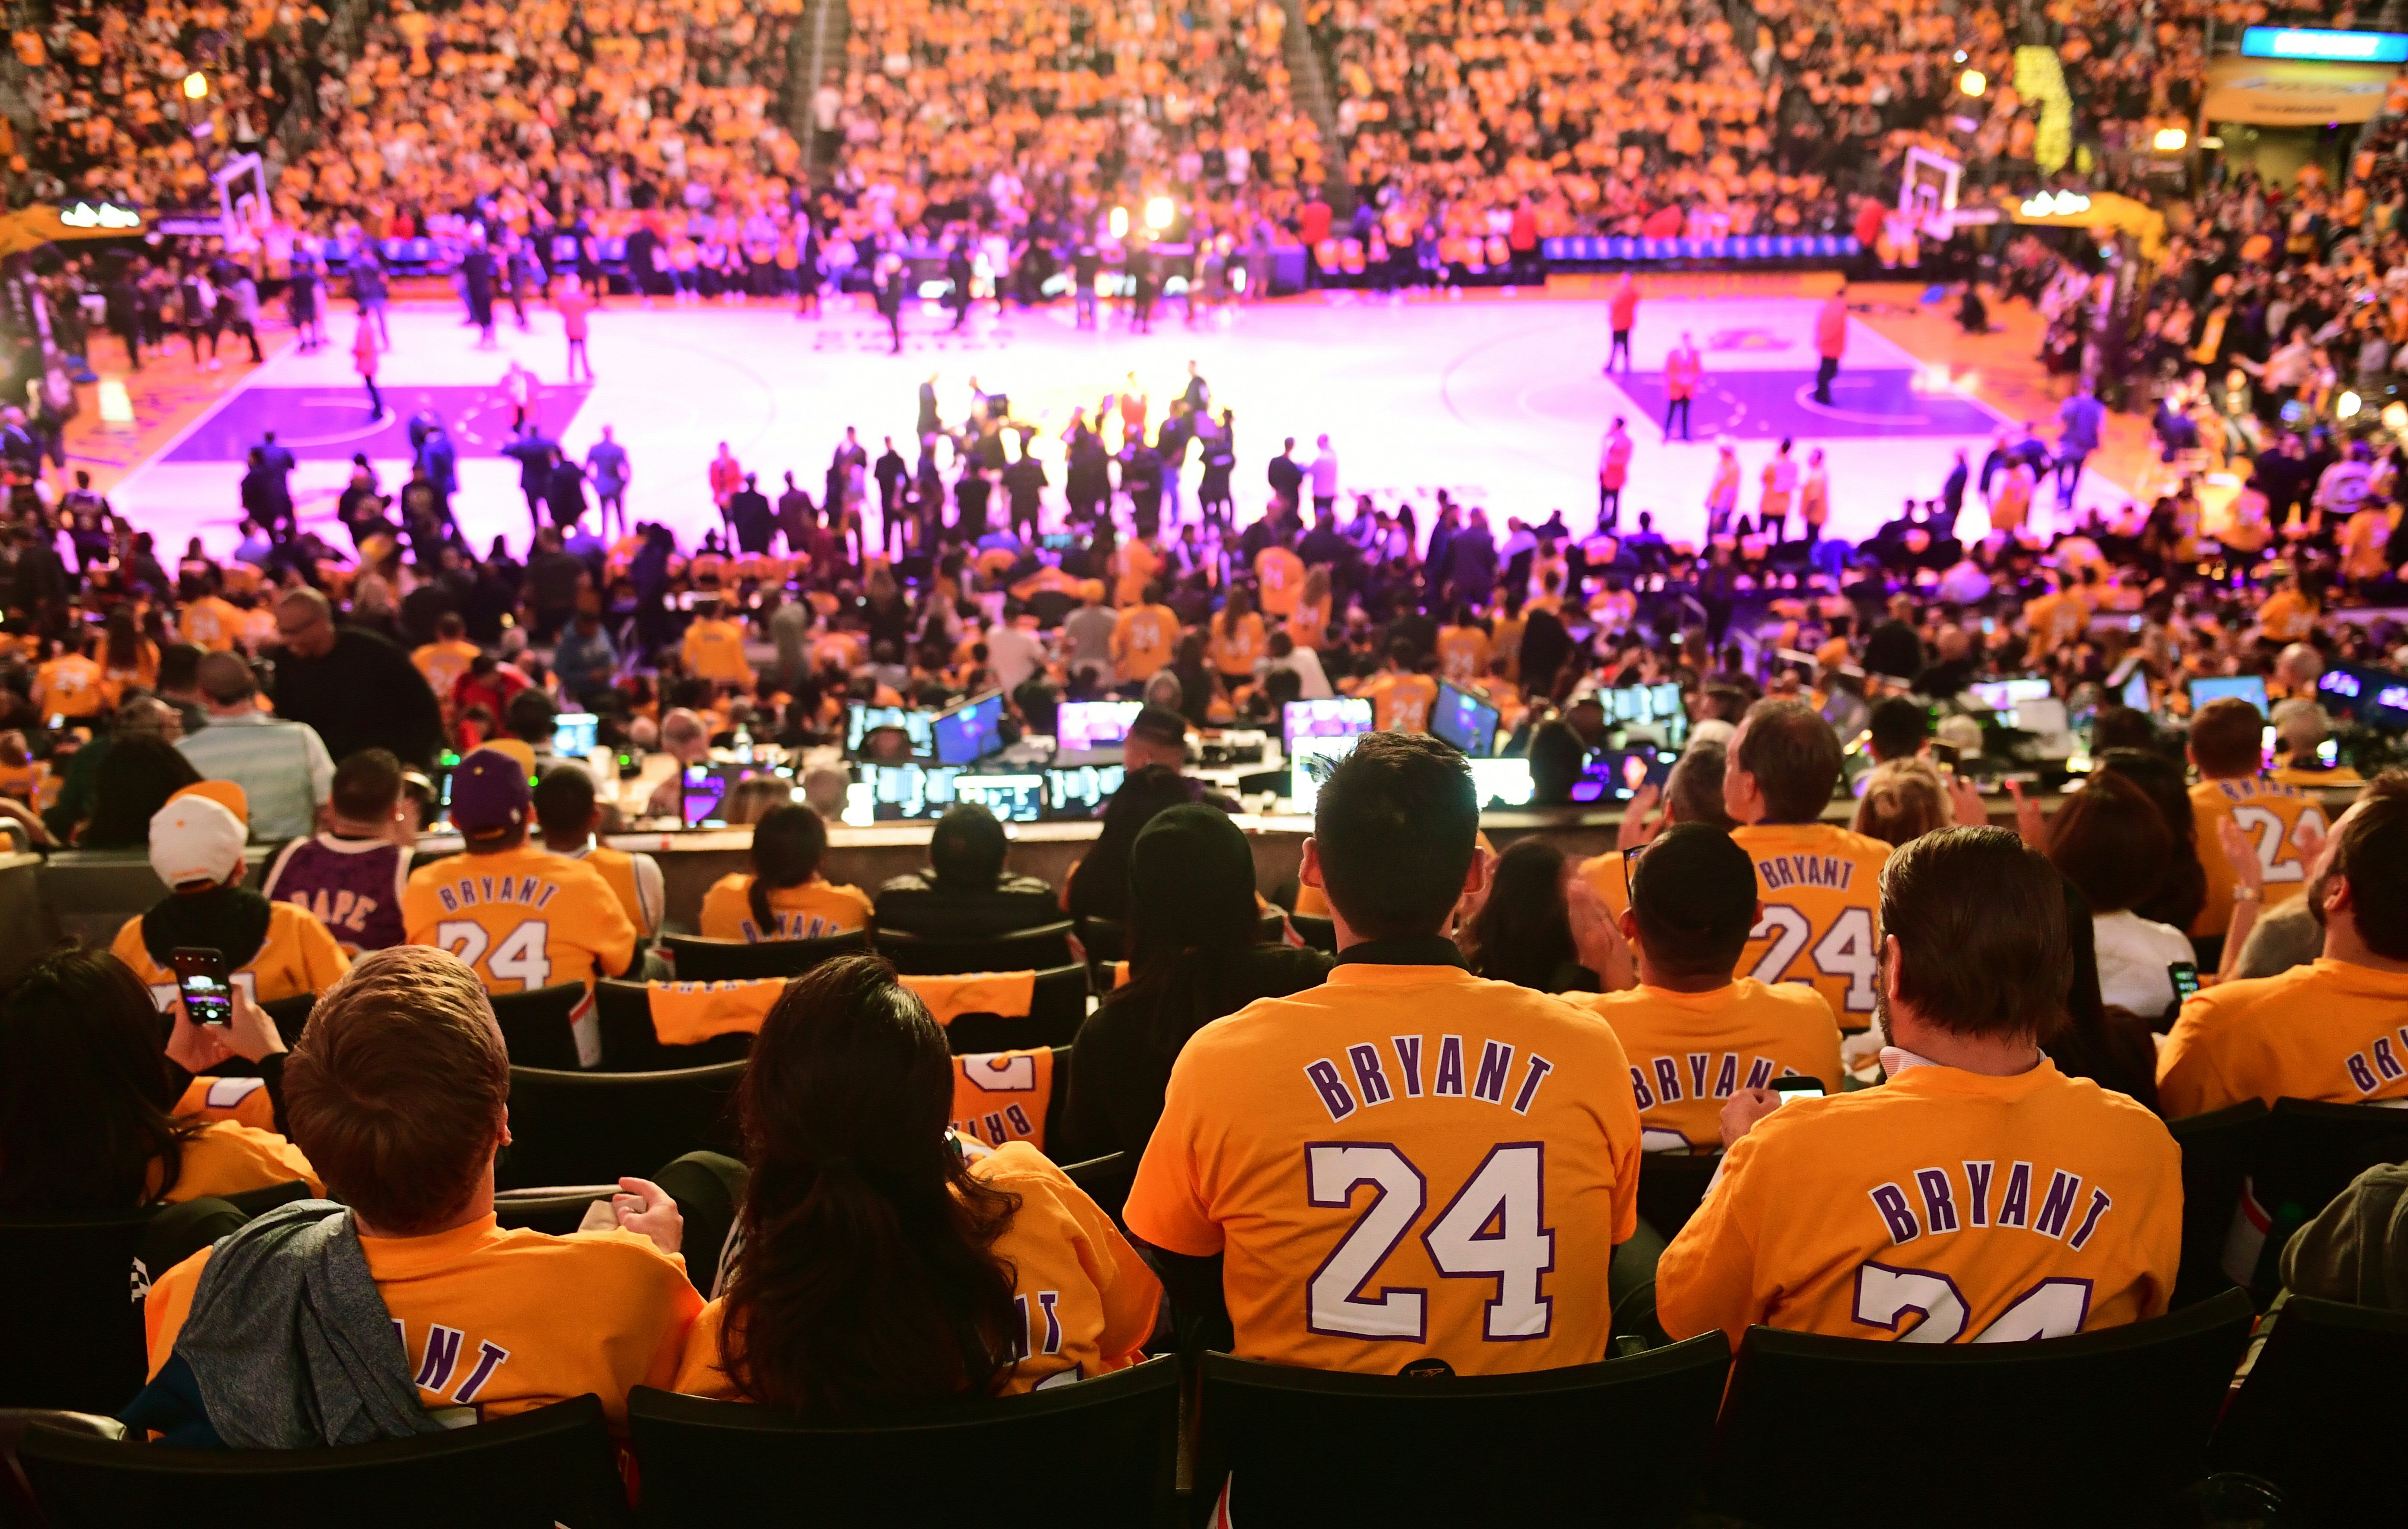 In this image, Lakers fans wear Bryant jerseys at the game